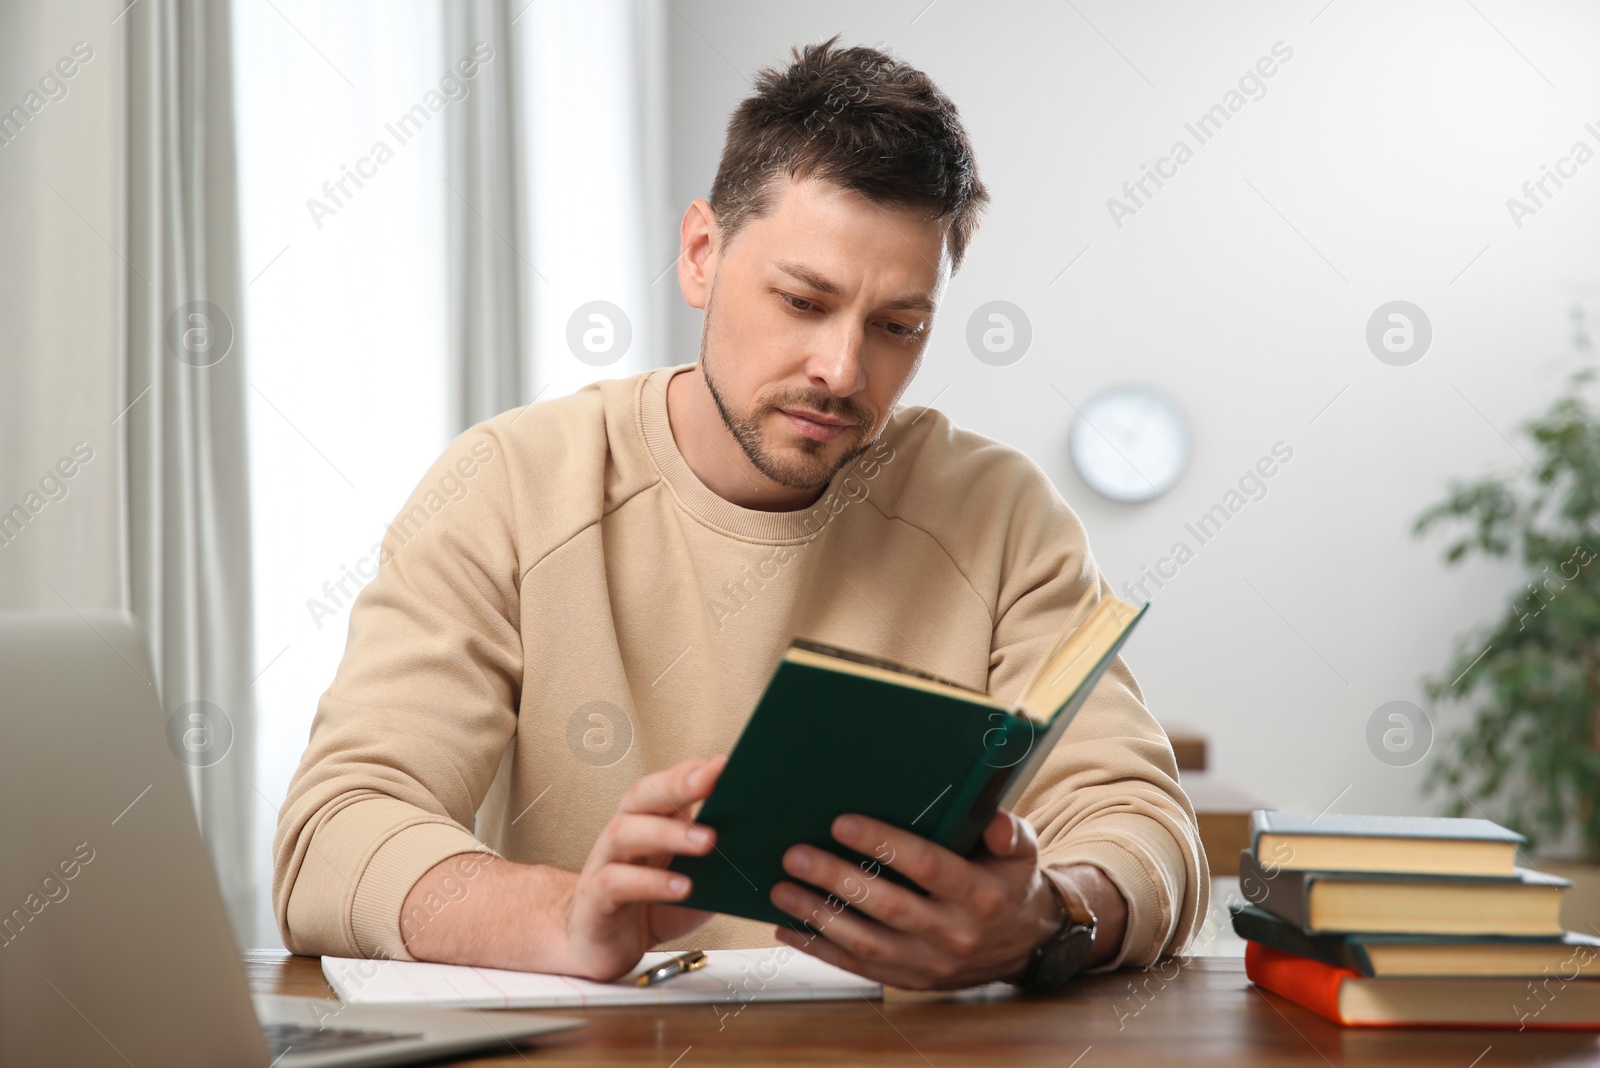 Photo of Man reading book at table in library